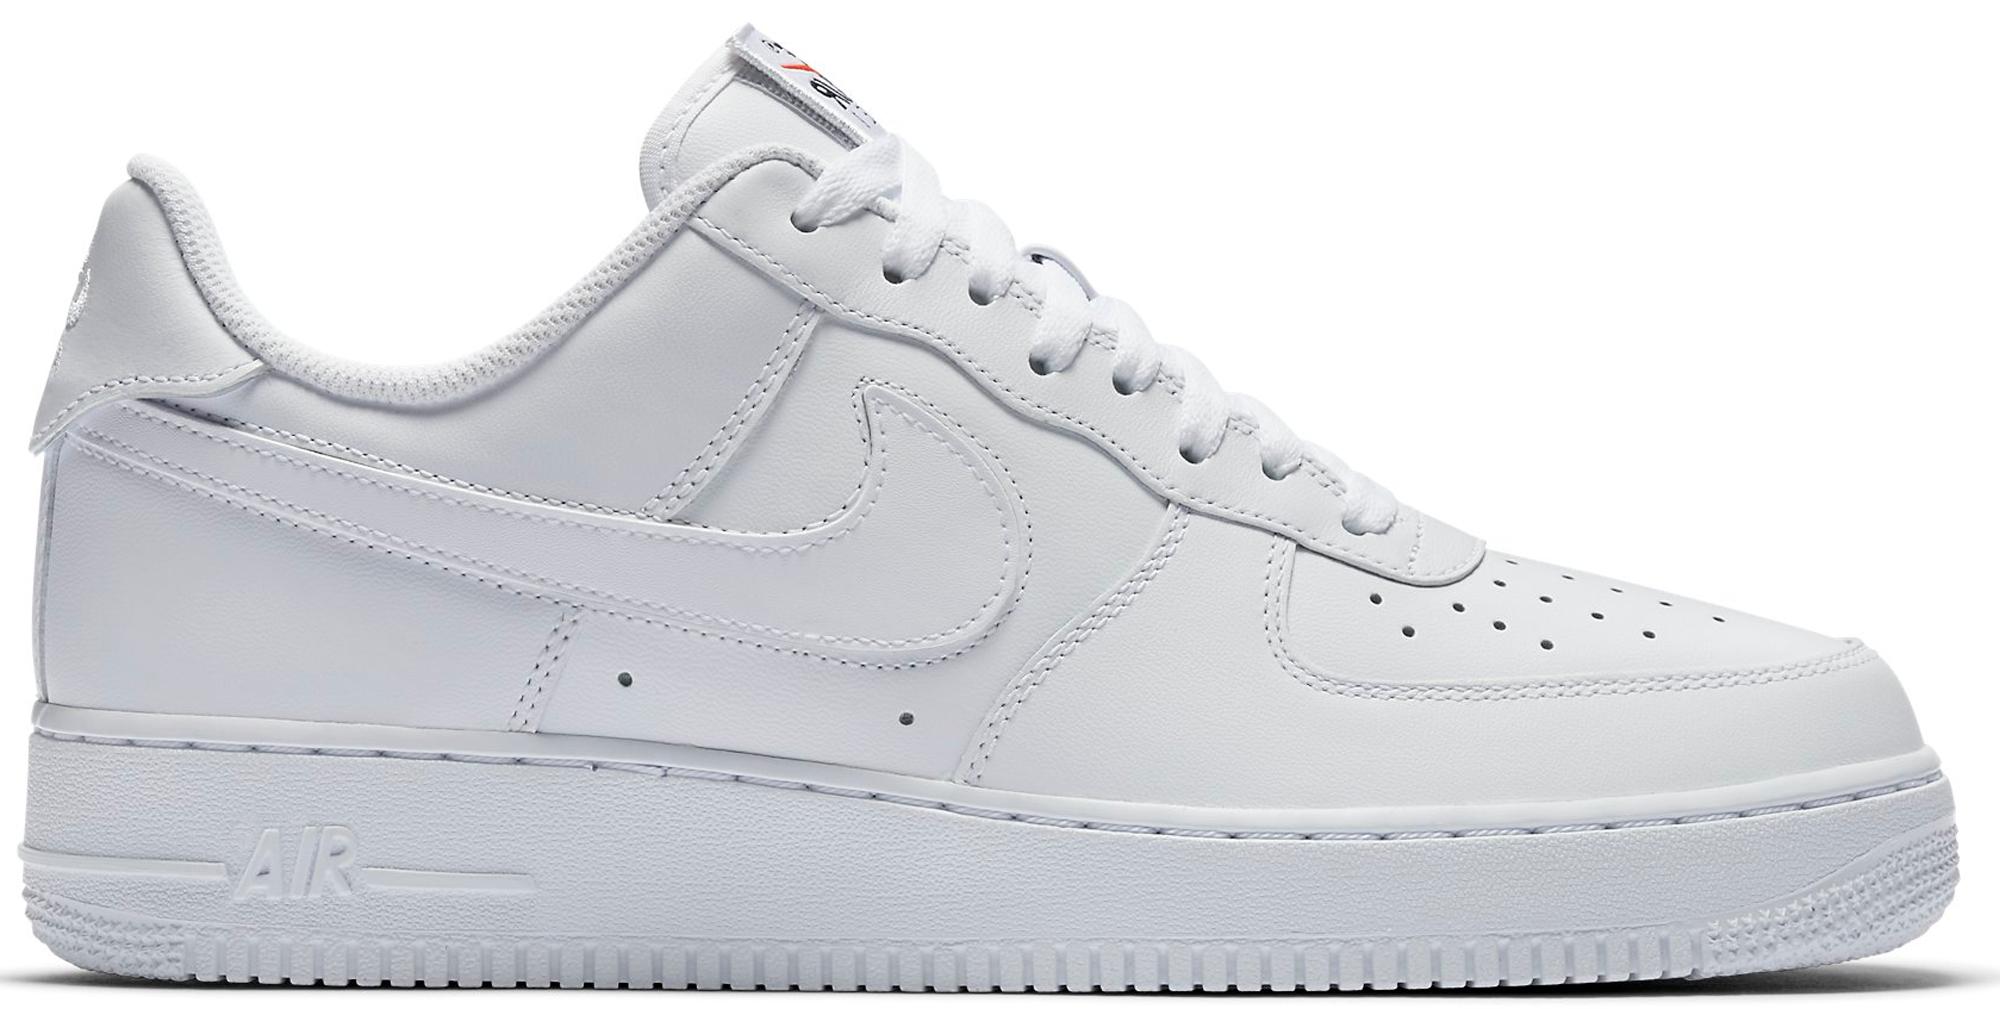 Nike Air Force 1 Low 90/10Nike Air Force 1 Low Swoosh Pack White All-Star 2018 All-Star 2018 White